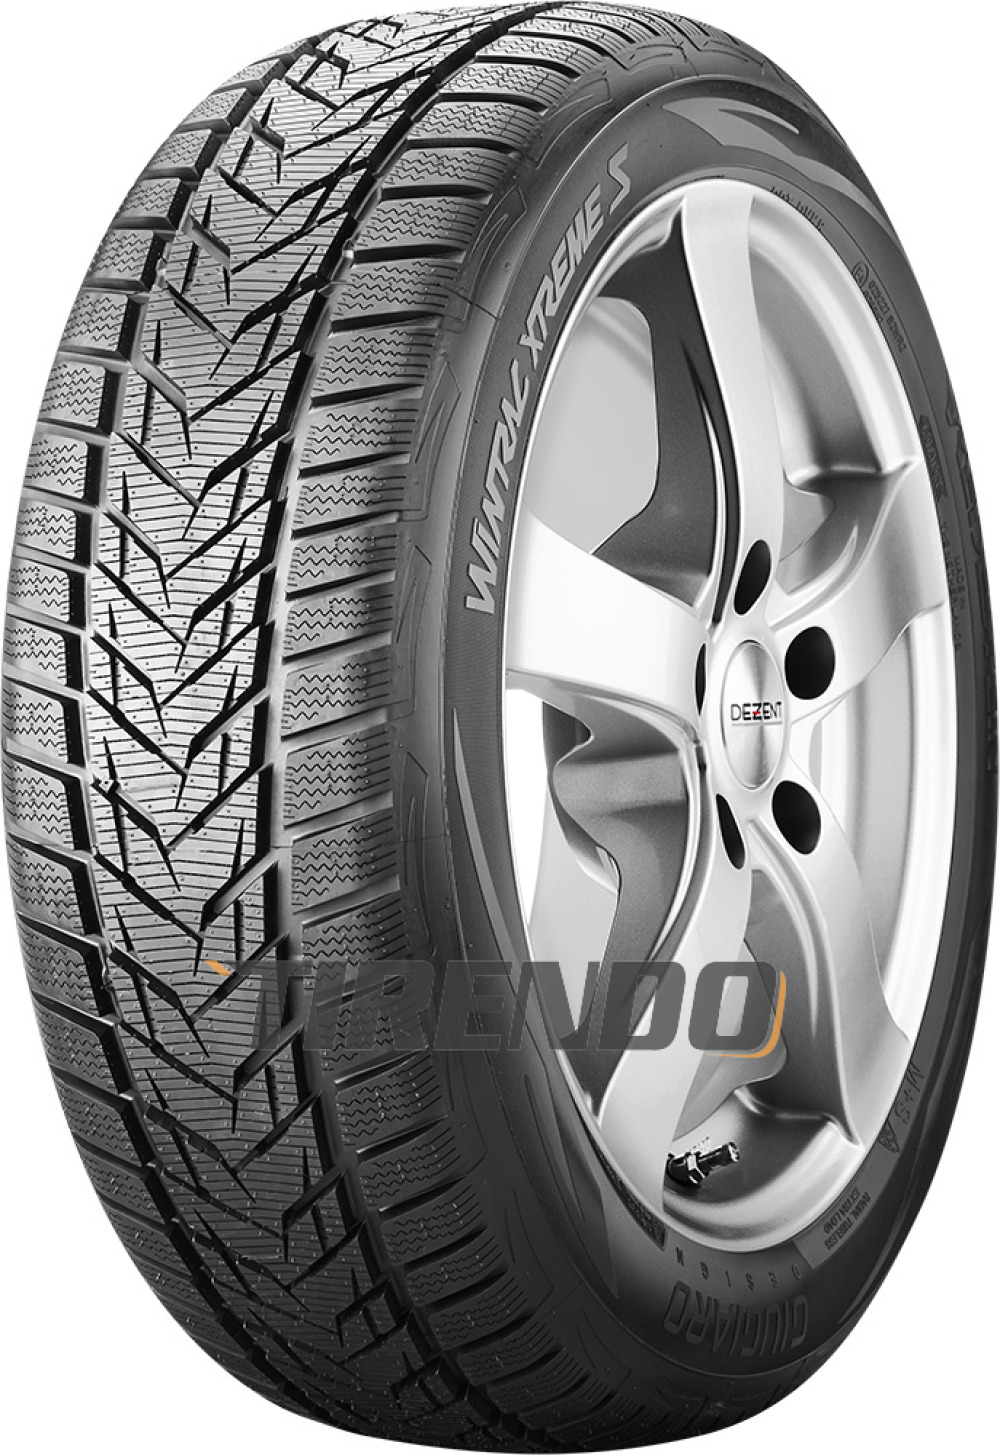 Image of Vredestein Wintrac Xtreme S ( 255/50 R19 107V XL, MO )